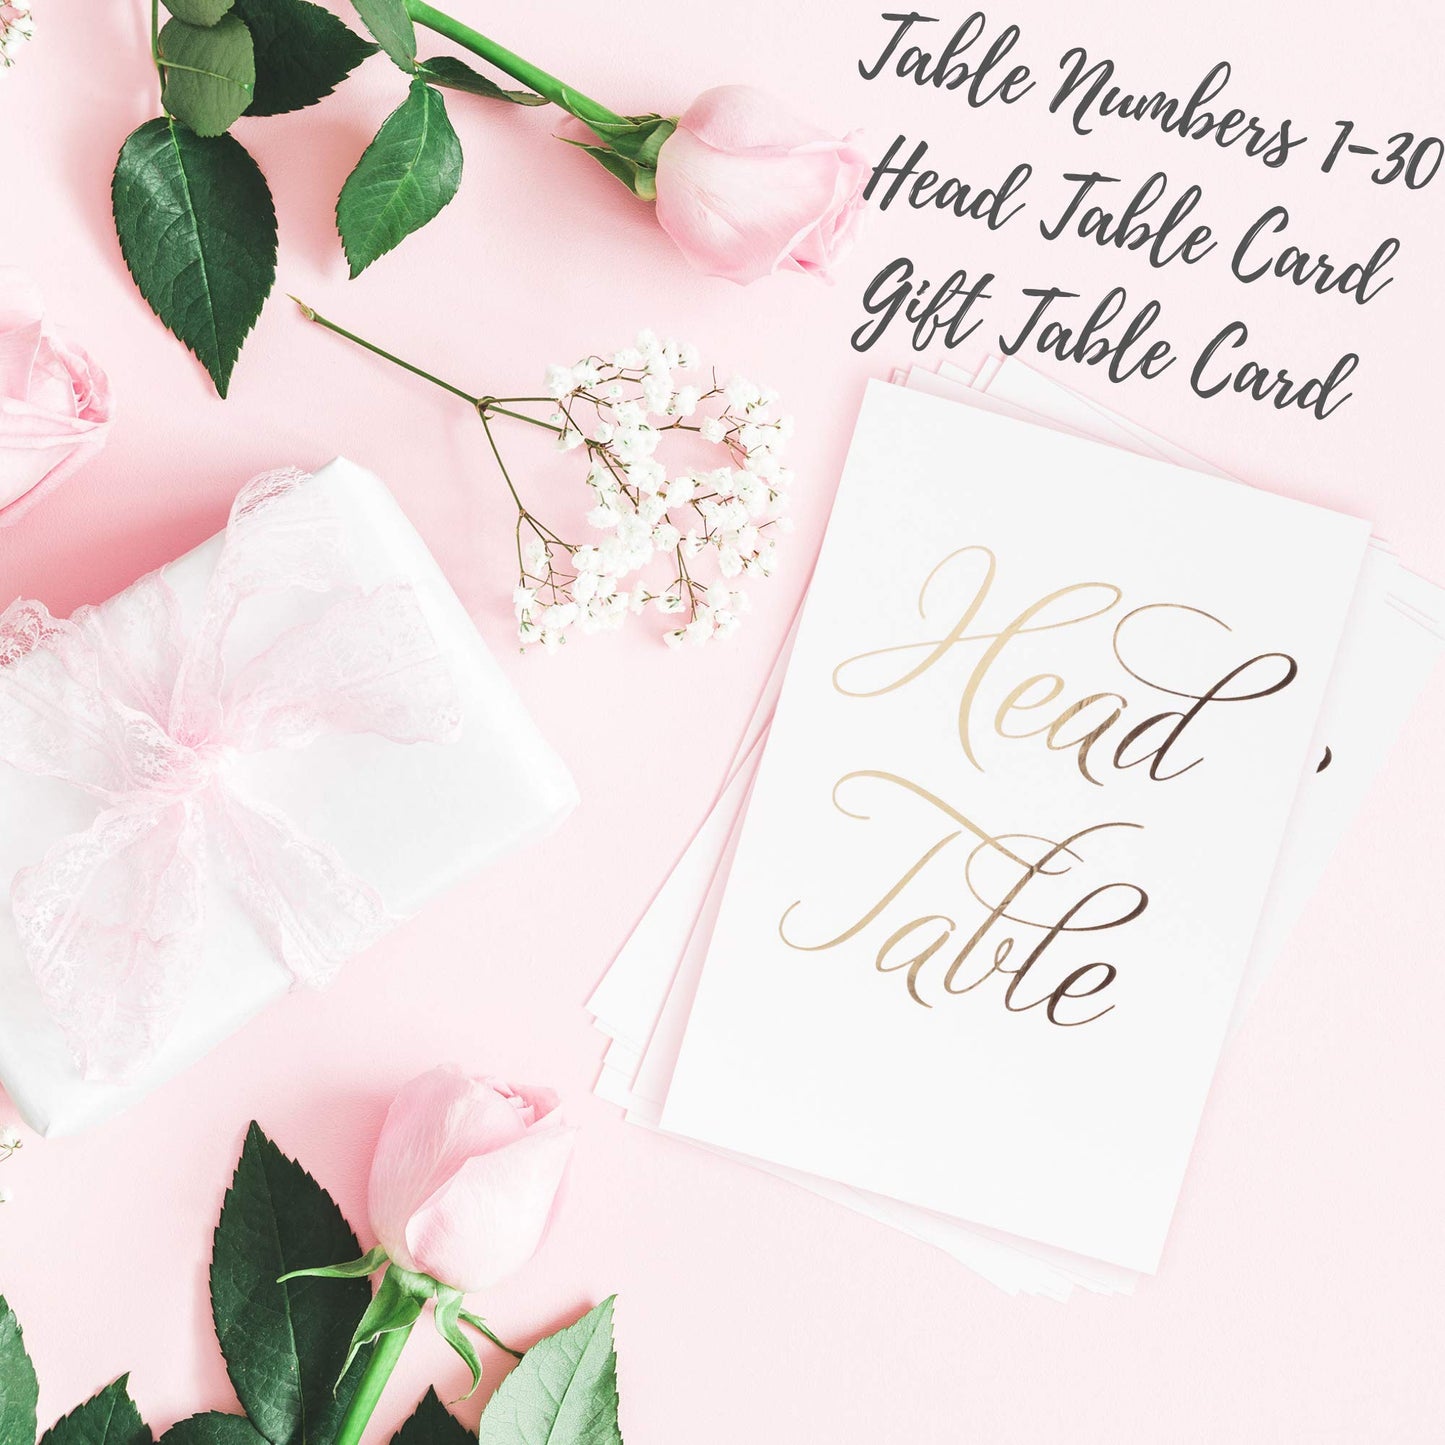 Gorgeous Wedding Table Numbers - Elegant Double Sided Rose Gold Foil Lettering with Head and Gift Table Card - 4 x 6 inches and Numbered 1-30 - Perfect for Weddings and Events